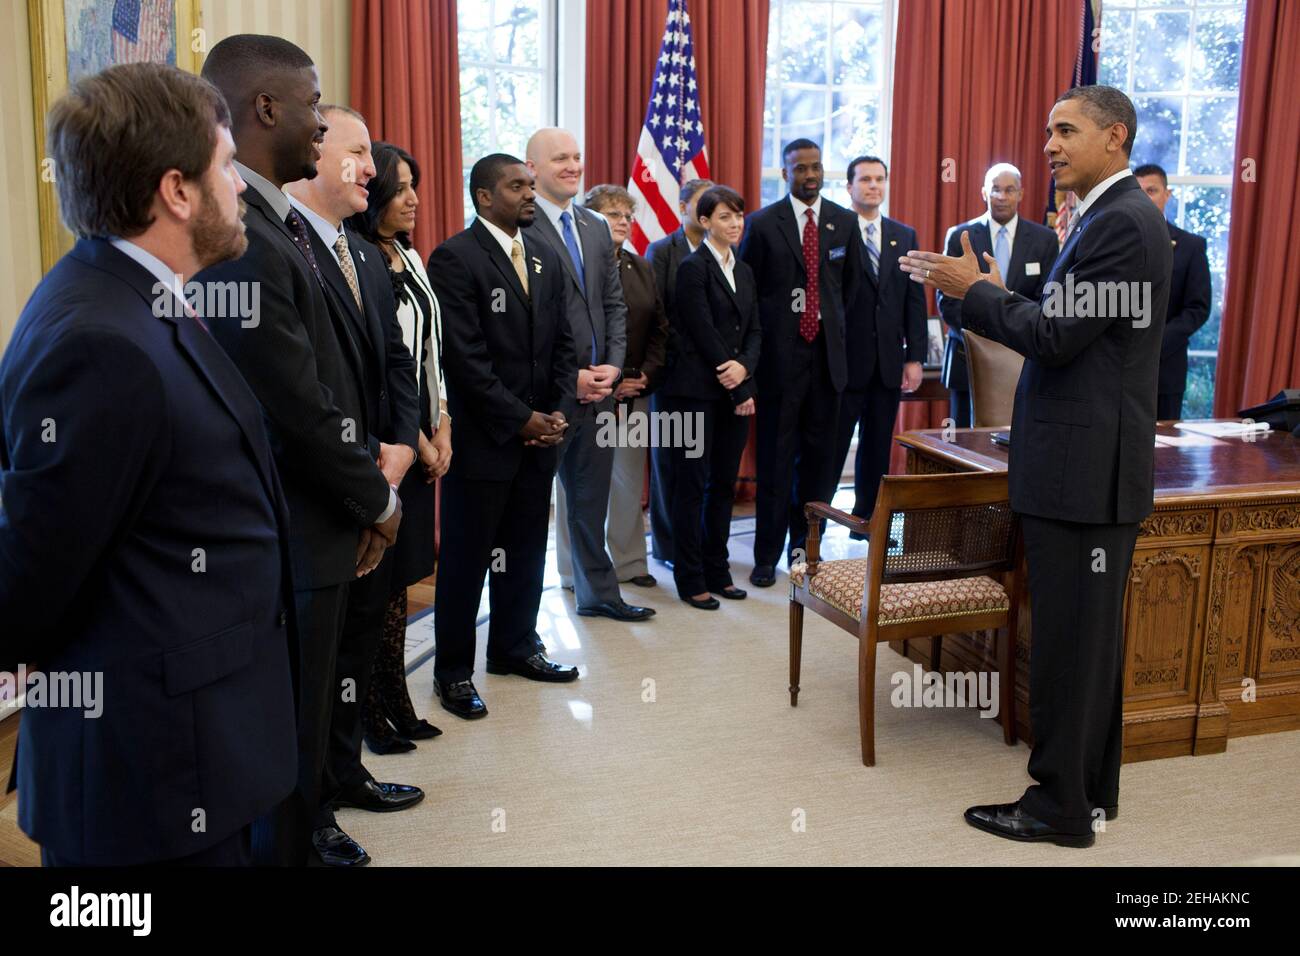 President Barack Obama greets representatives from leading veterans service organizations in the Oval Office before delivering remarks on the American Jobs Act in the Rose Garden, Nov. 7, 2011. The President spoke about tax credits included in the American Jobs Act and new executive actions that will help get veterans back to work. Stock Photo